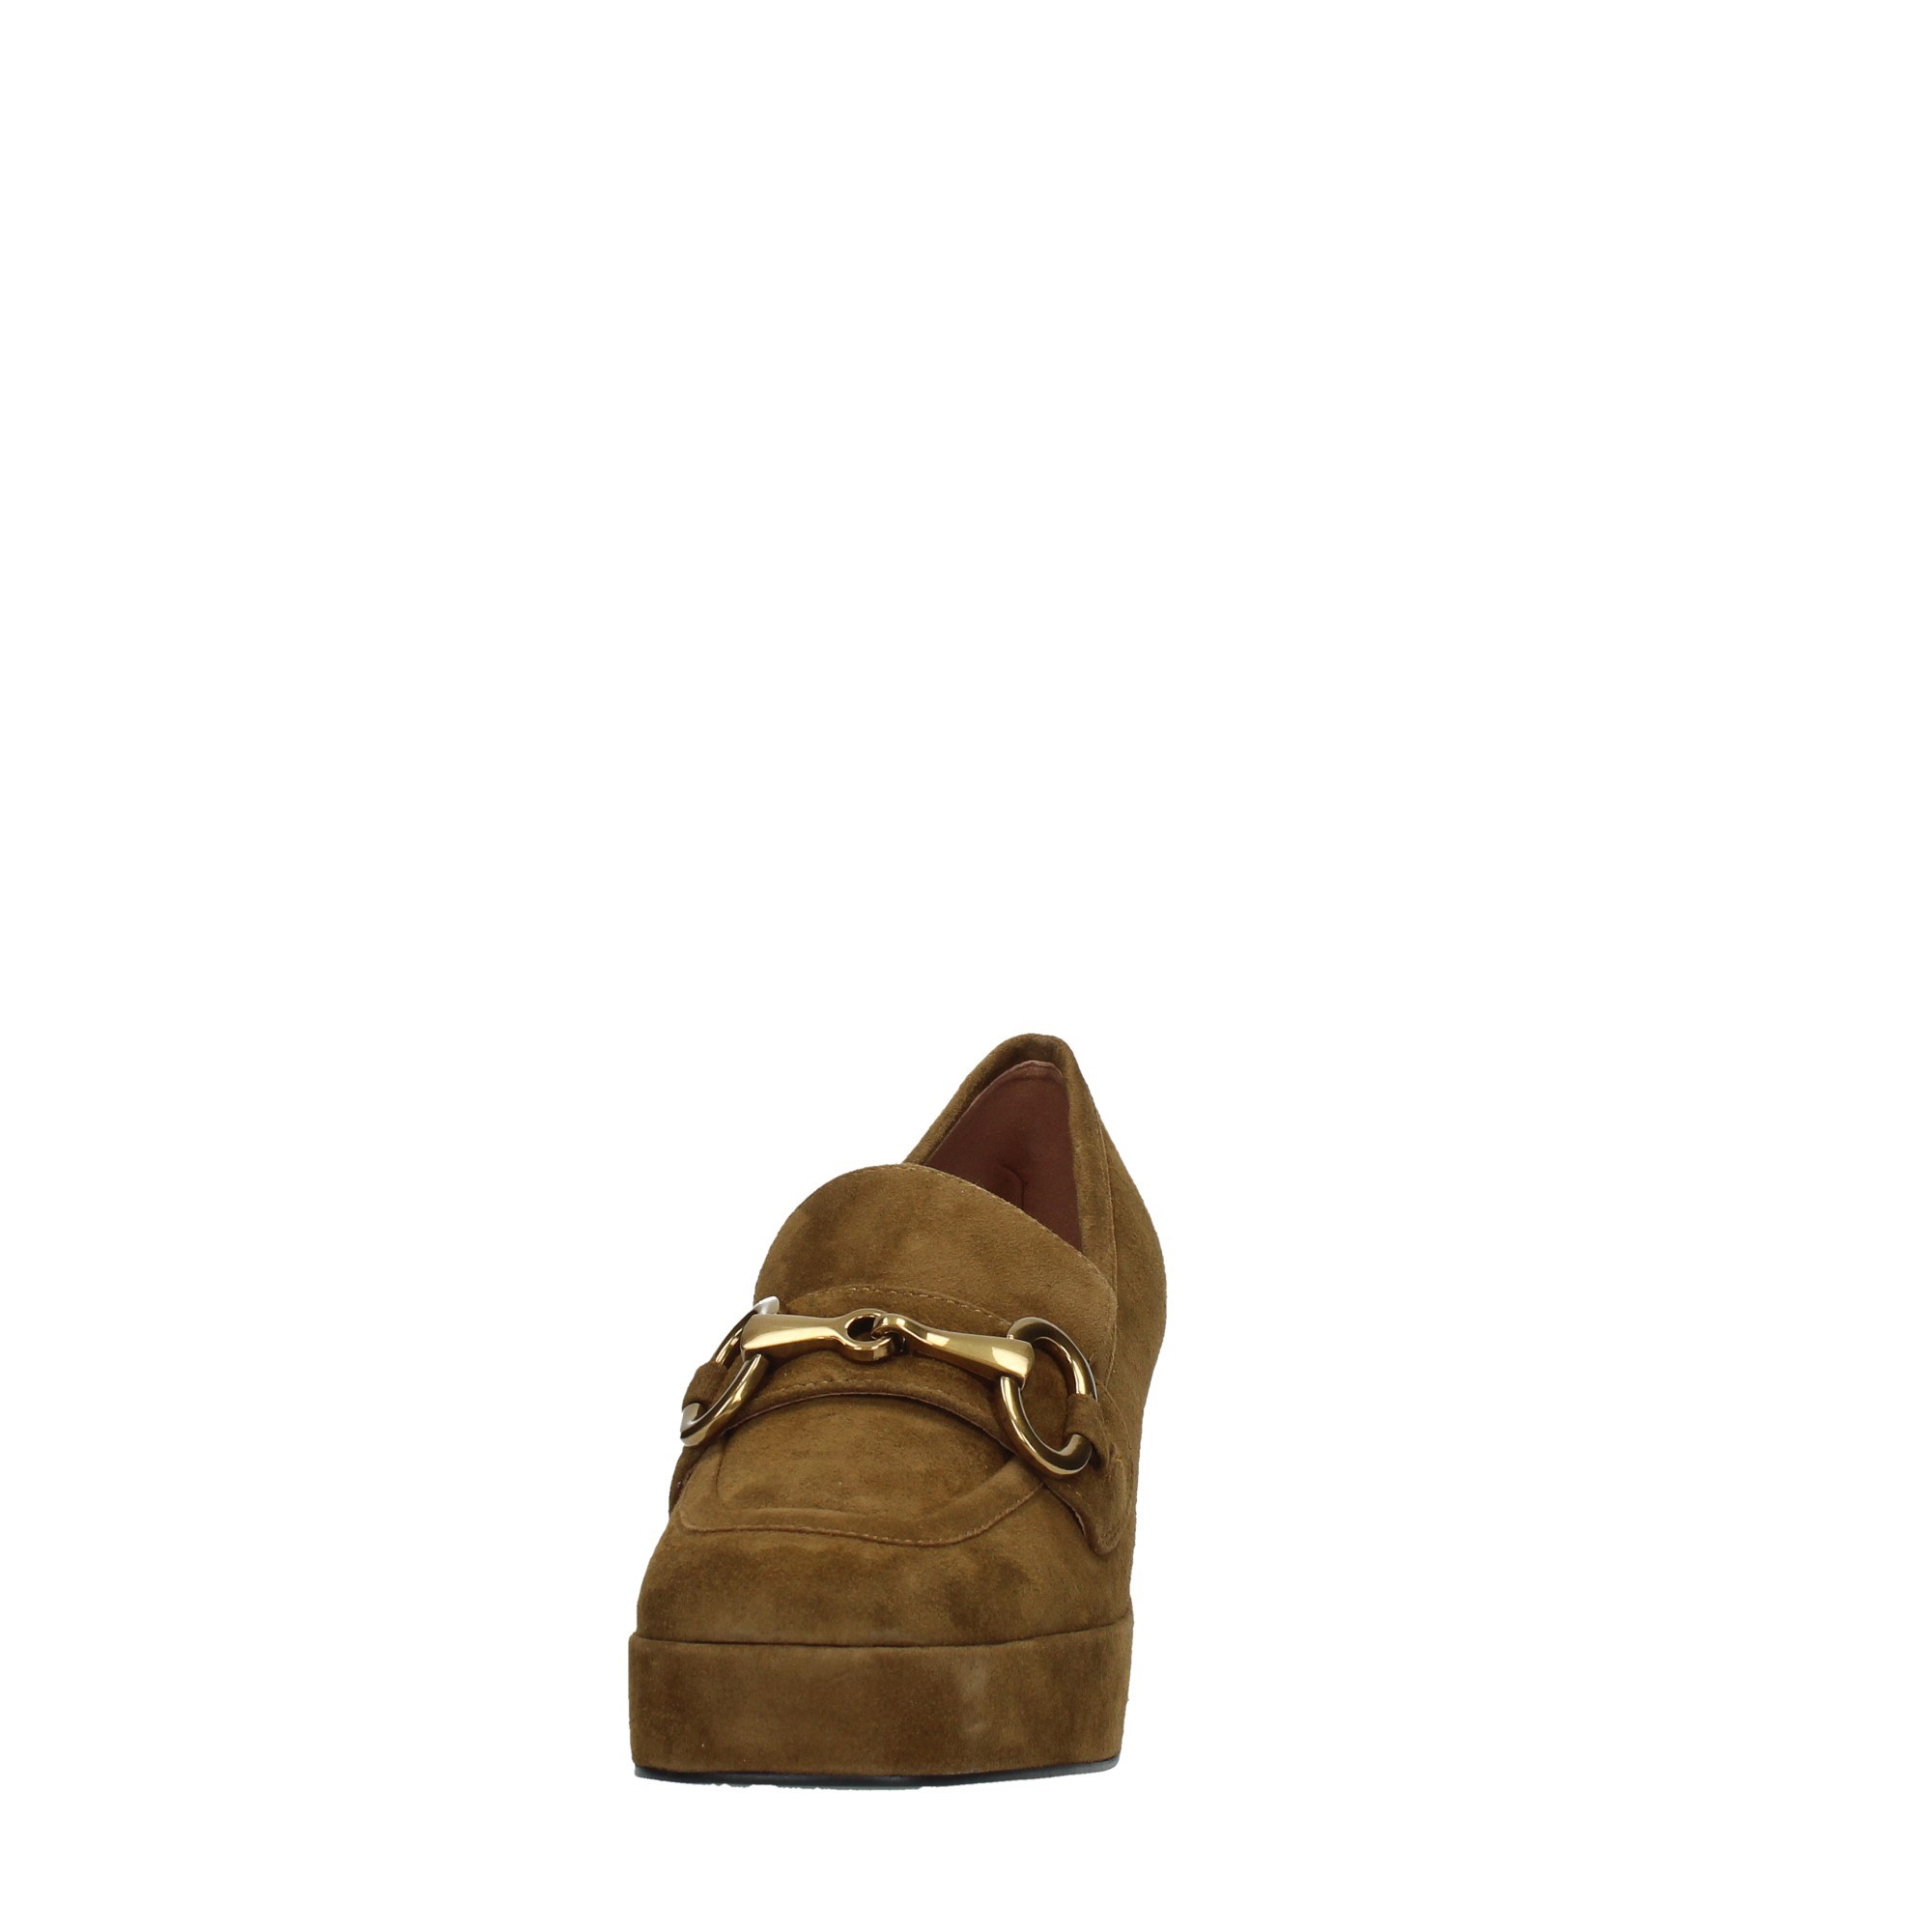 Bibilou Shoes Women Moccasins And Slippers 542